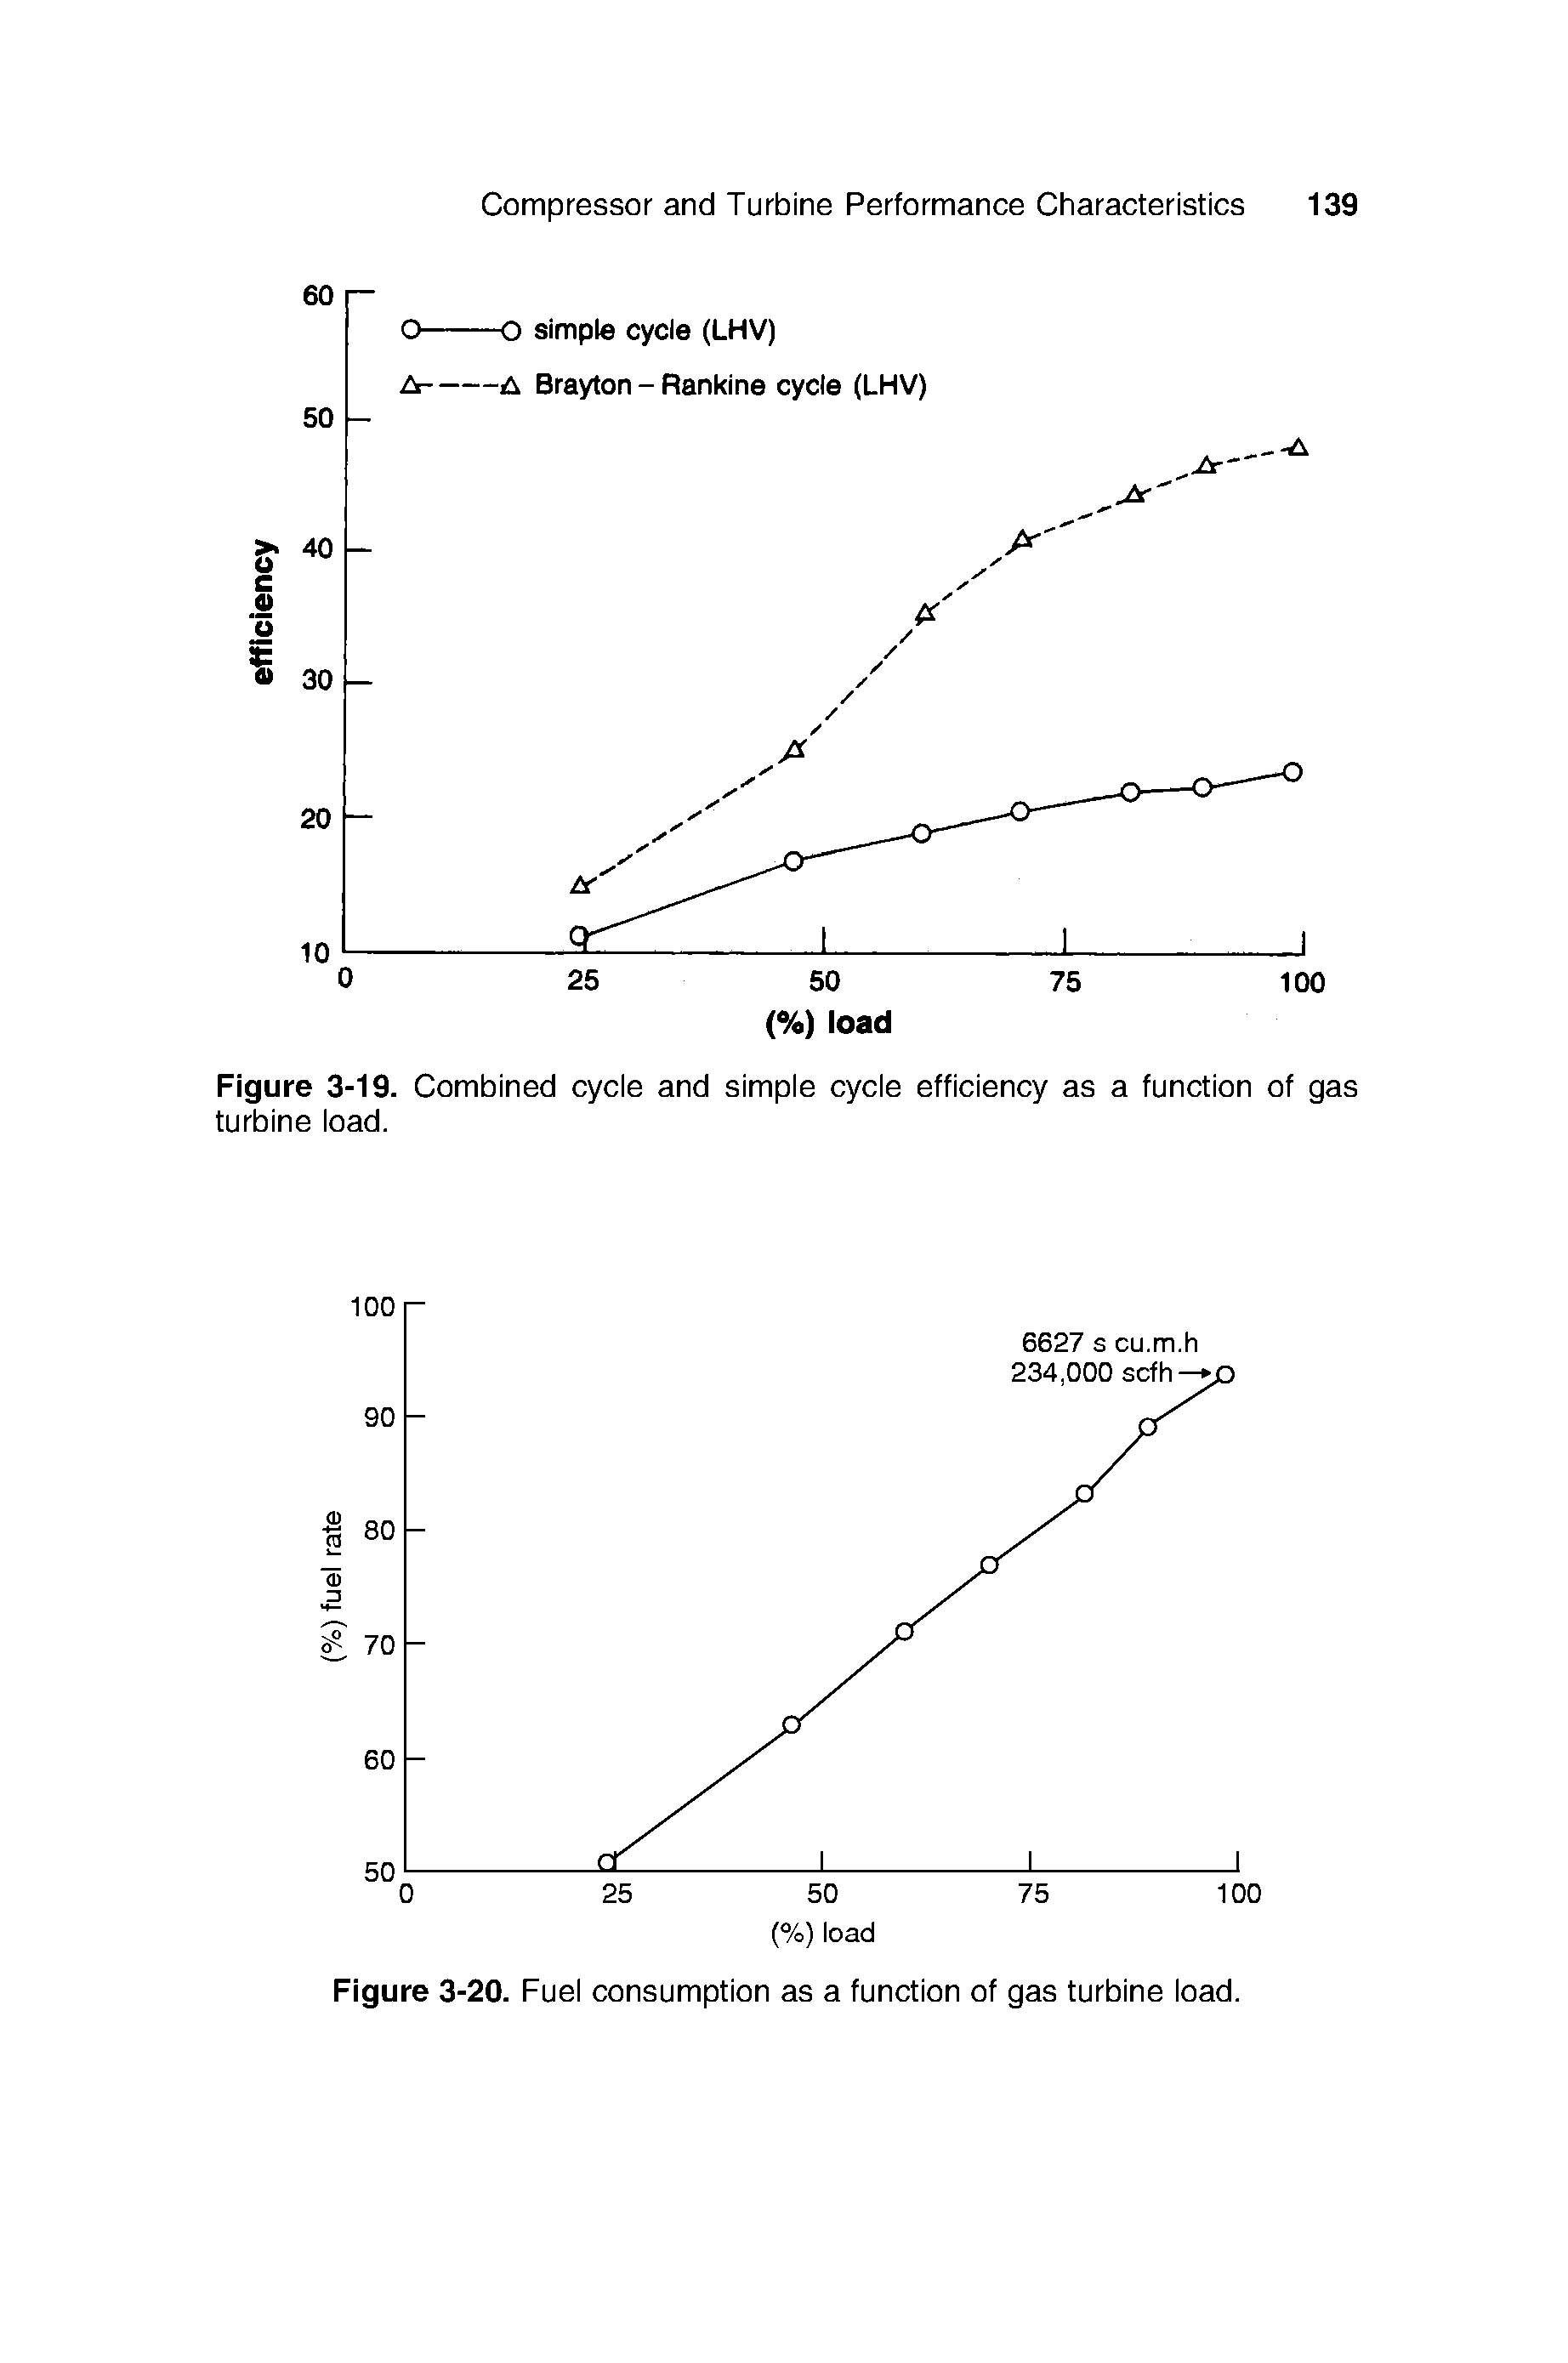 Figure 3-19. Combined cycie and simpie cycie efficiency as a function of gas turbine ioad.